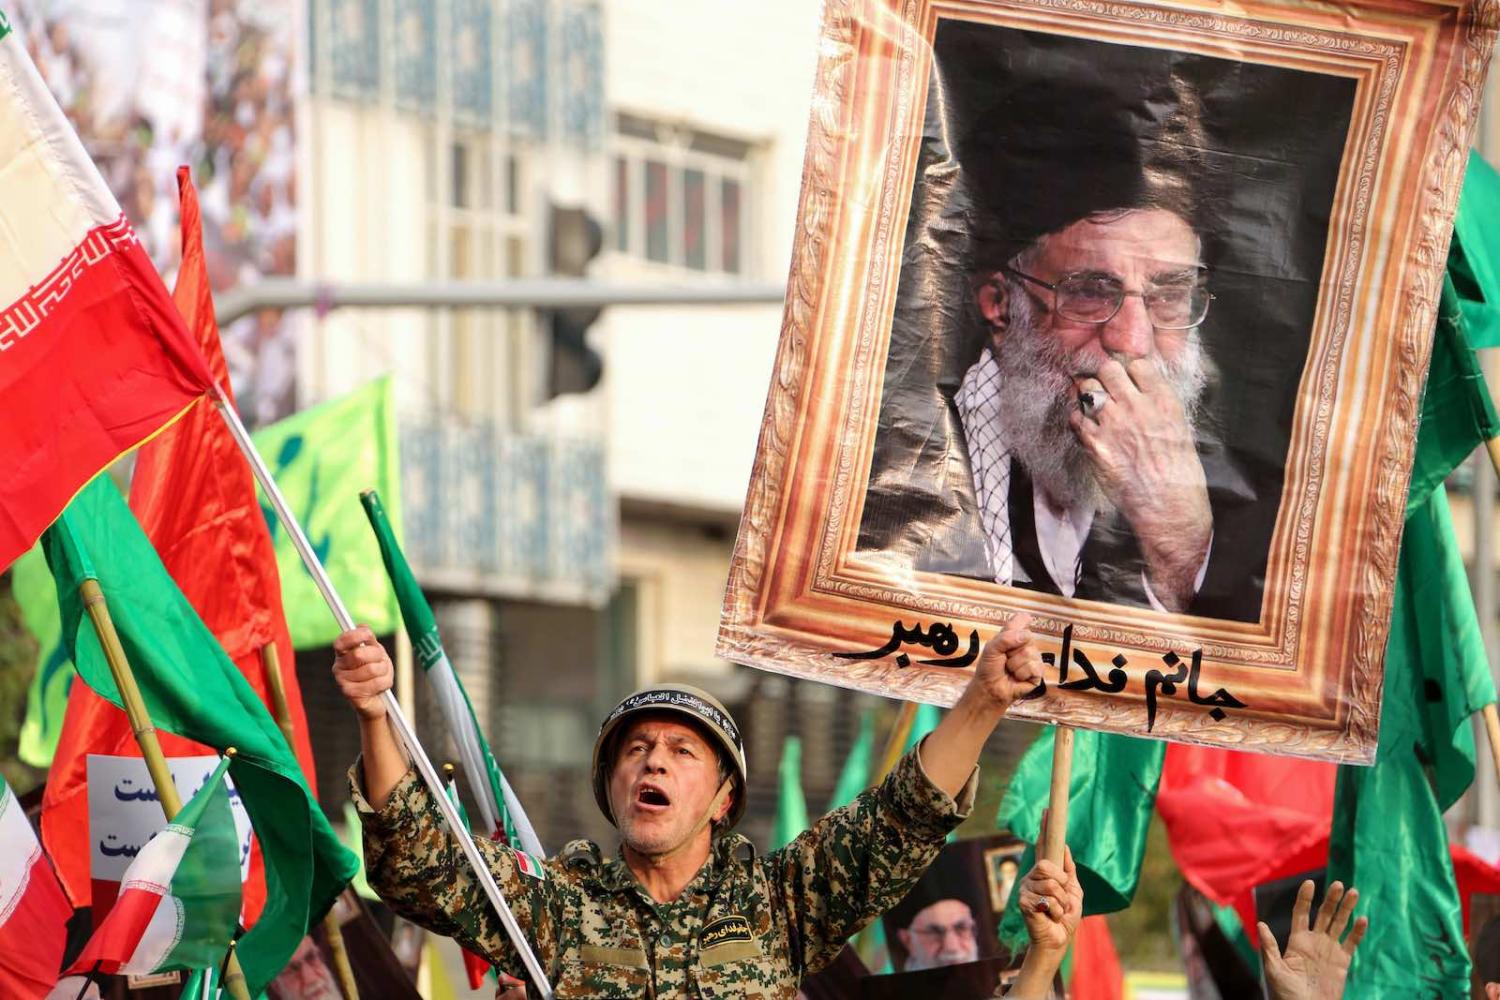 Iranian pro-government demonstrators on the streets in Tehran last month (Photo: Atta Kenare/AFP/Getty Images)